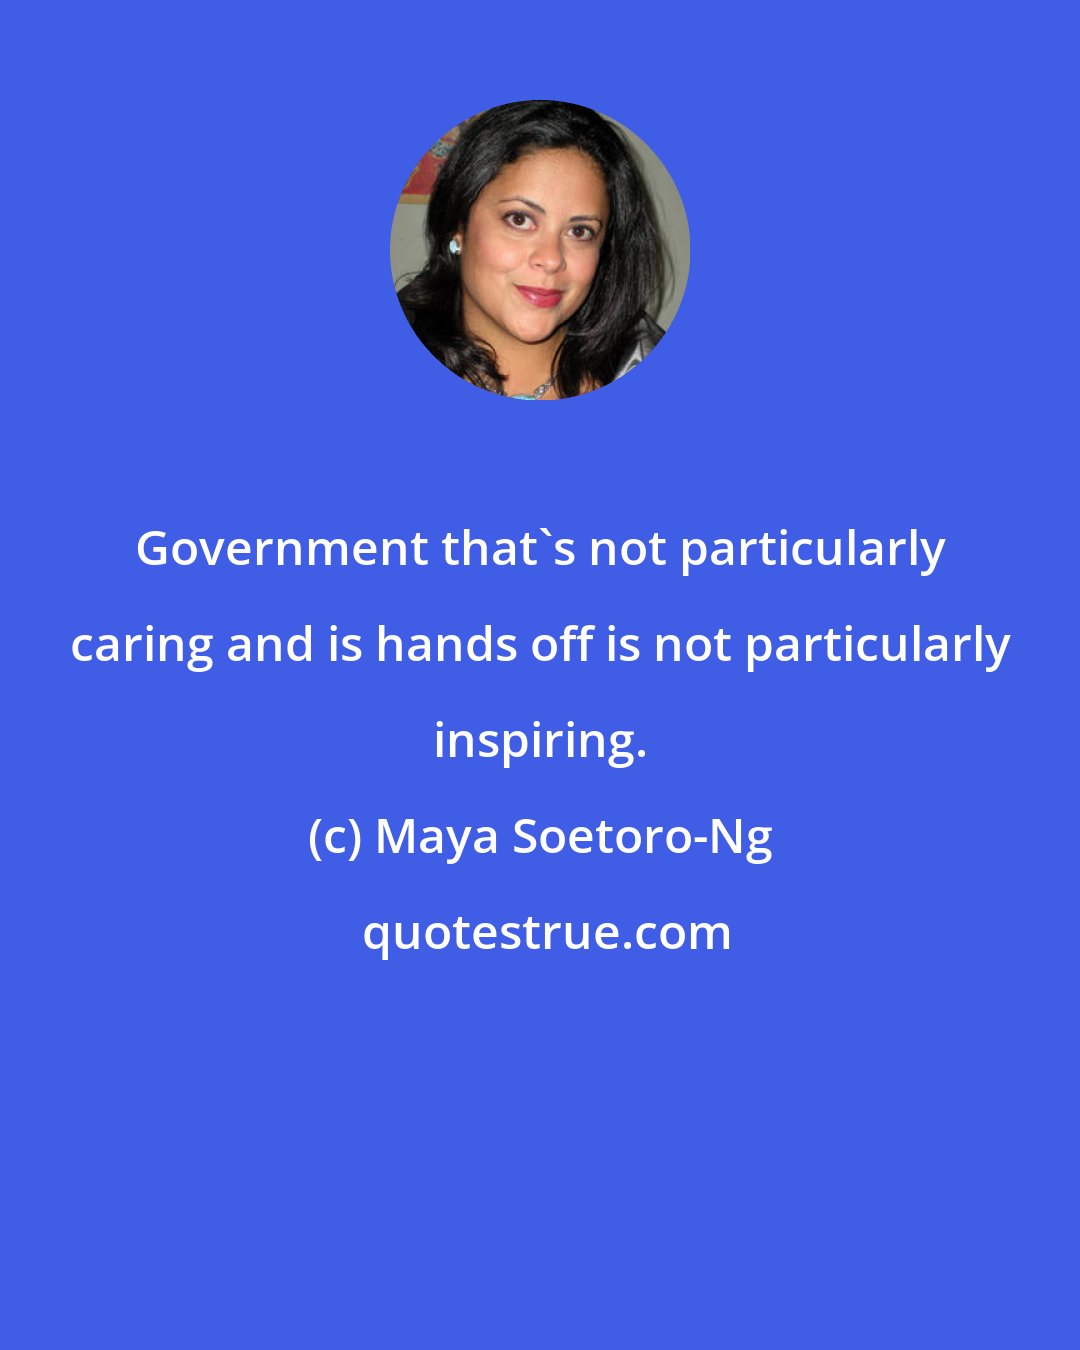 Maya Soetoro-Ng: Government that's not particularly caring and is hands off is not particularly inspiring.